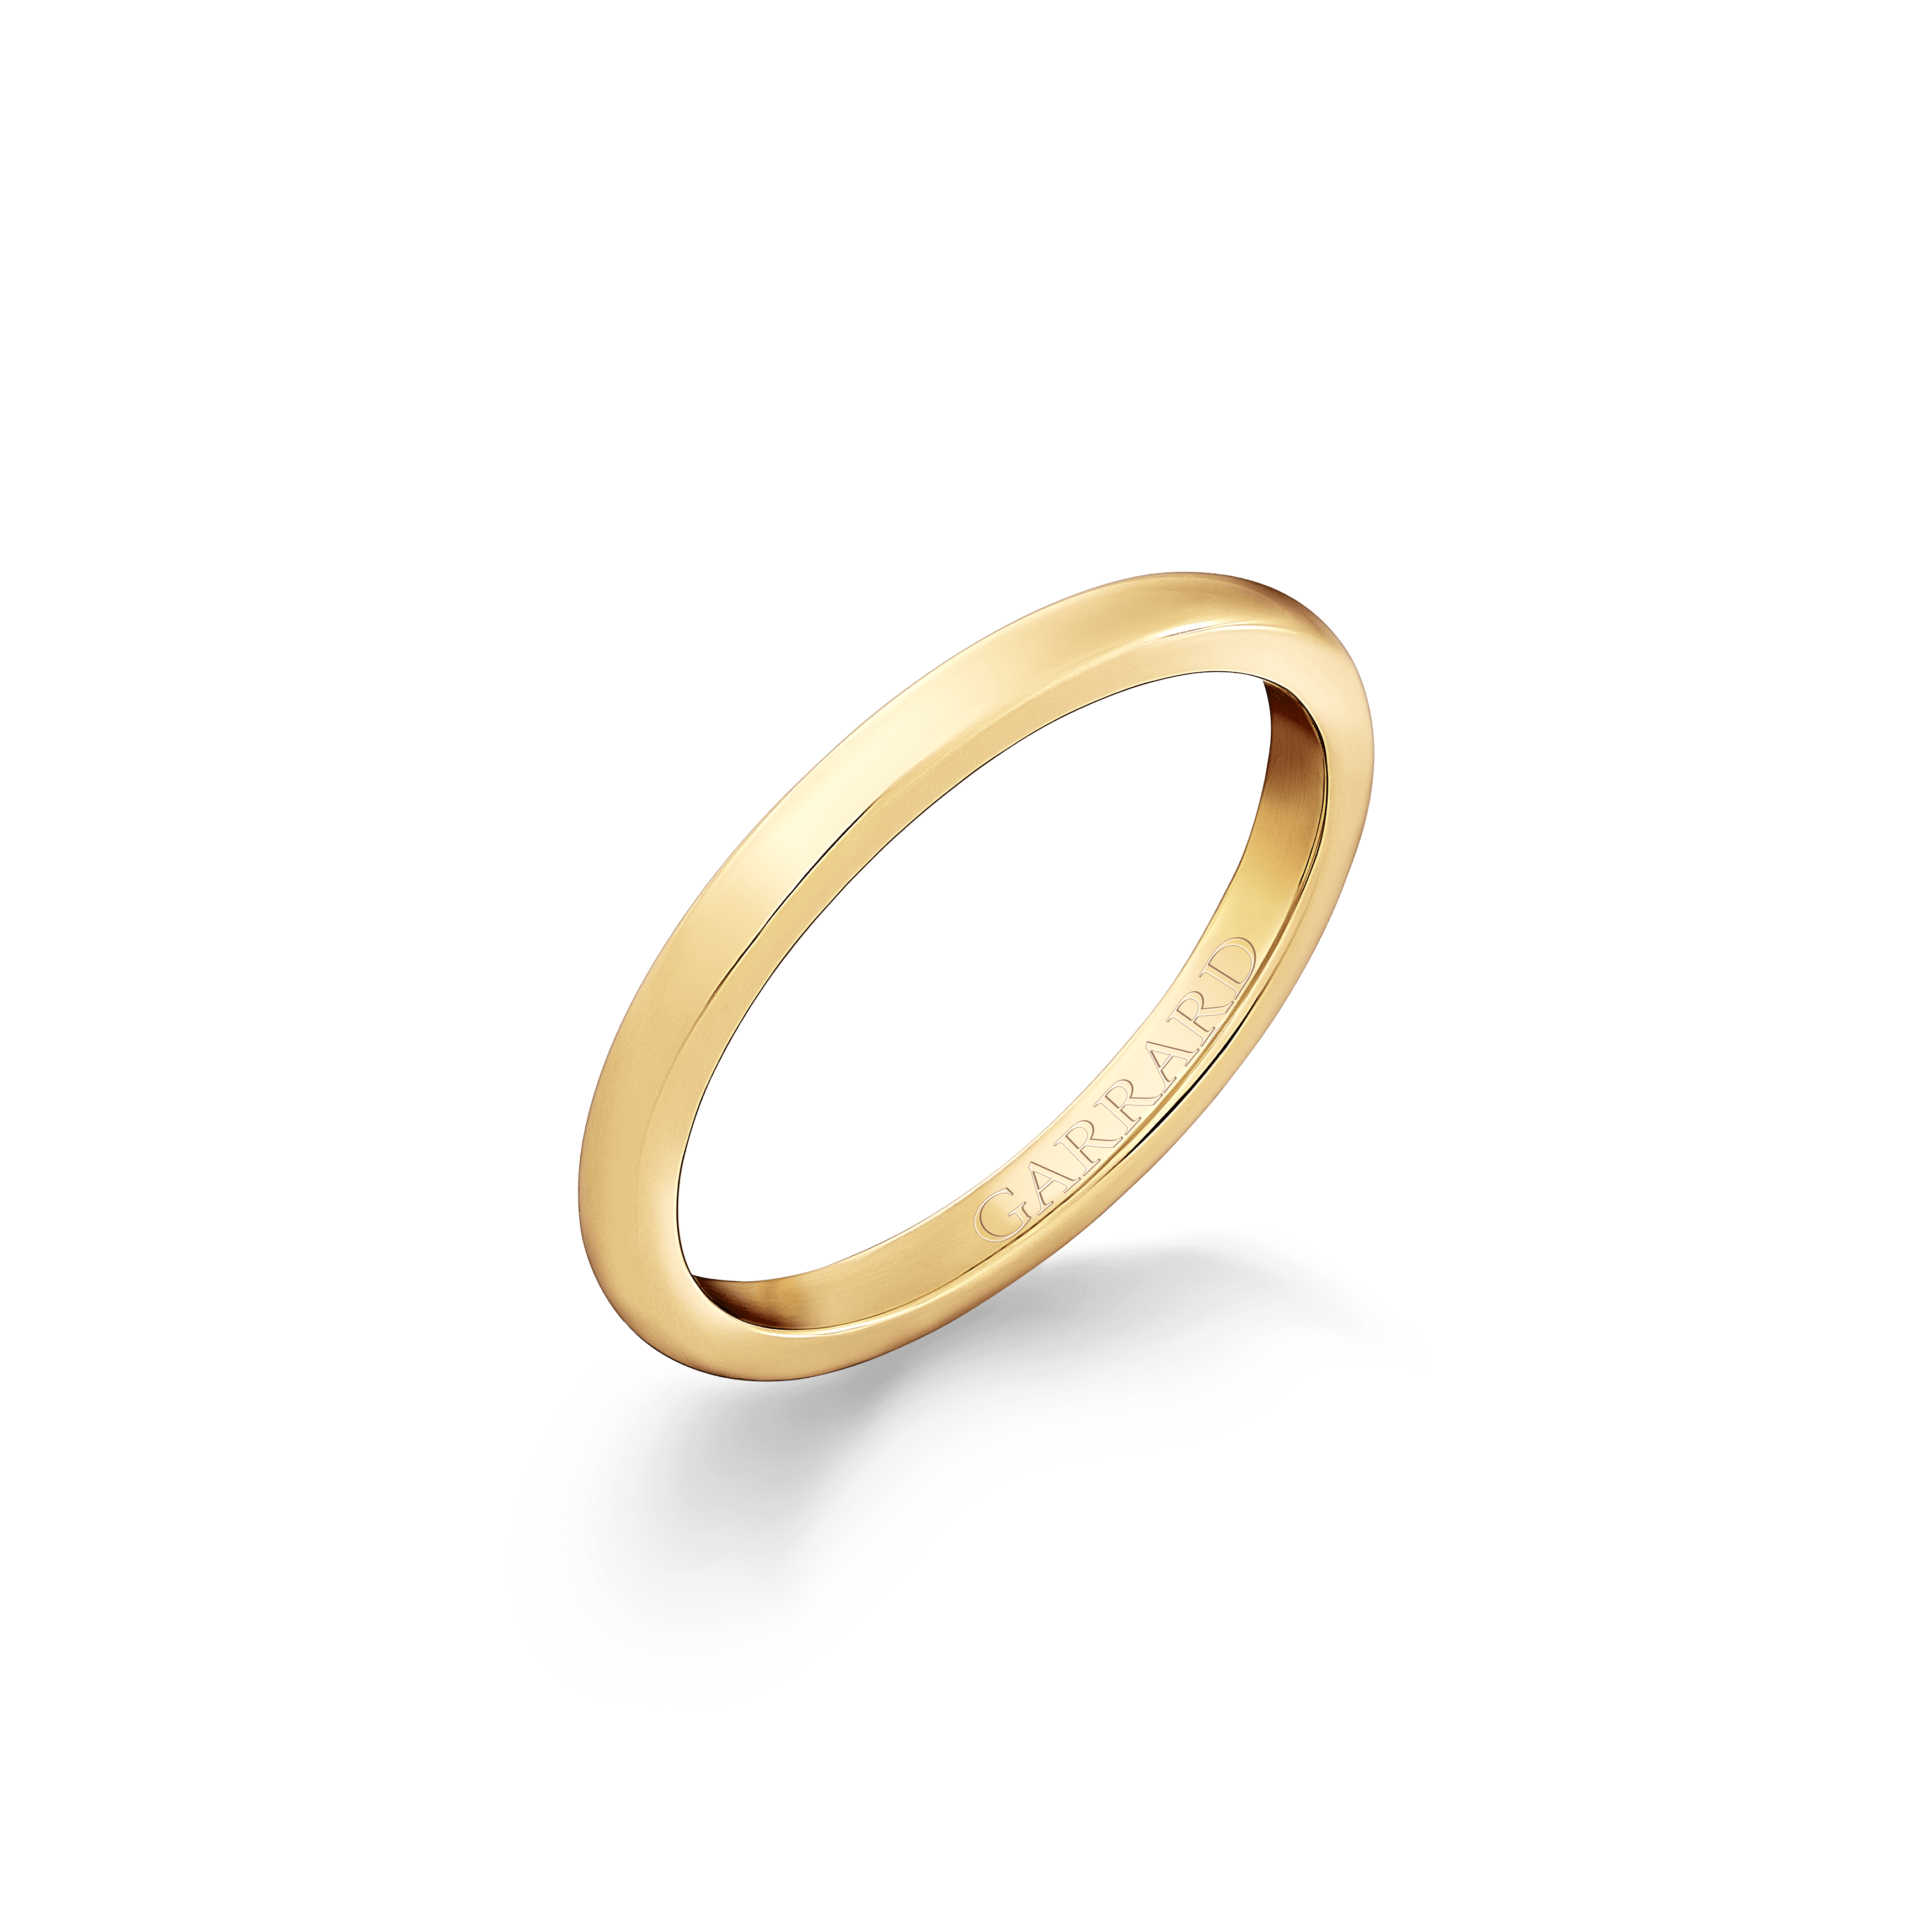 Buy Women's 10K Gold Wedding Band Classic Plain Simple 2MM in Yellow by  Brilliant Expressions, Size 9 at Amazon.in